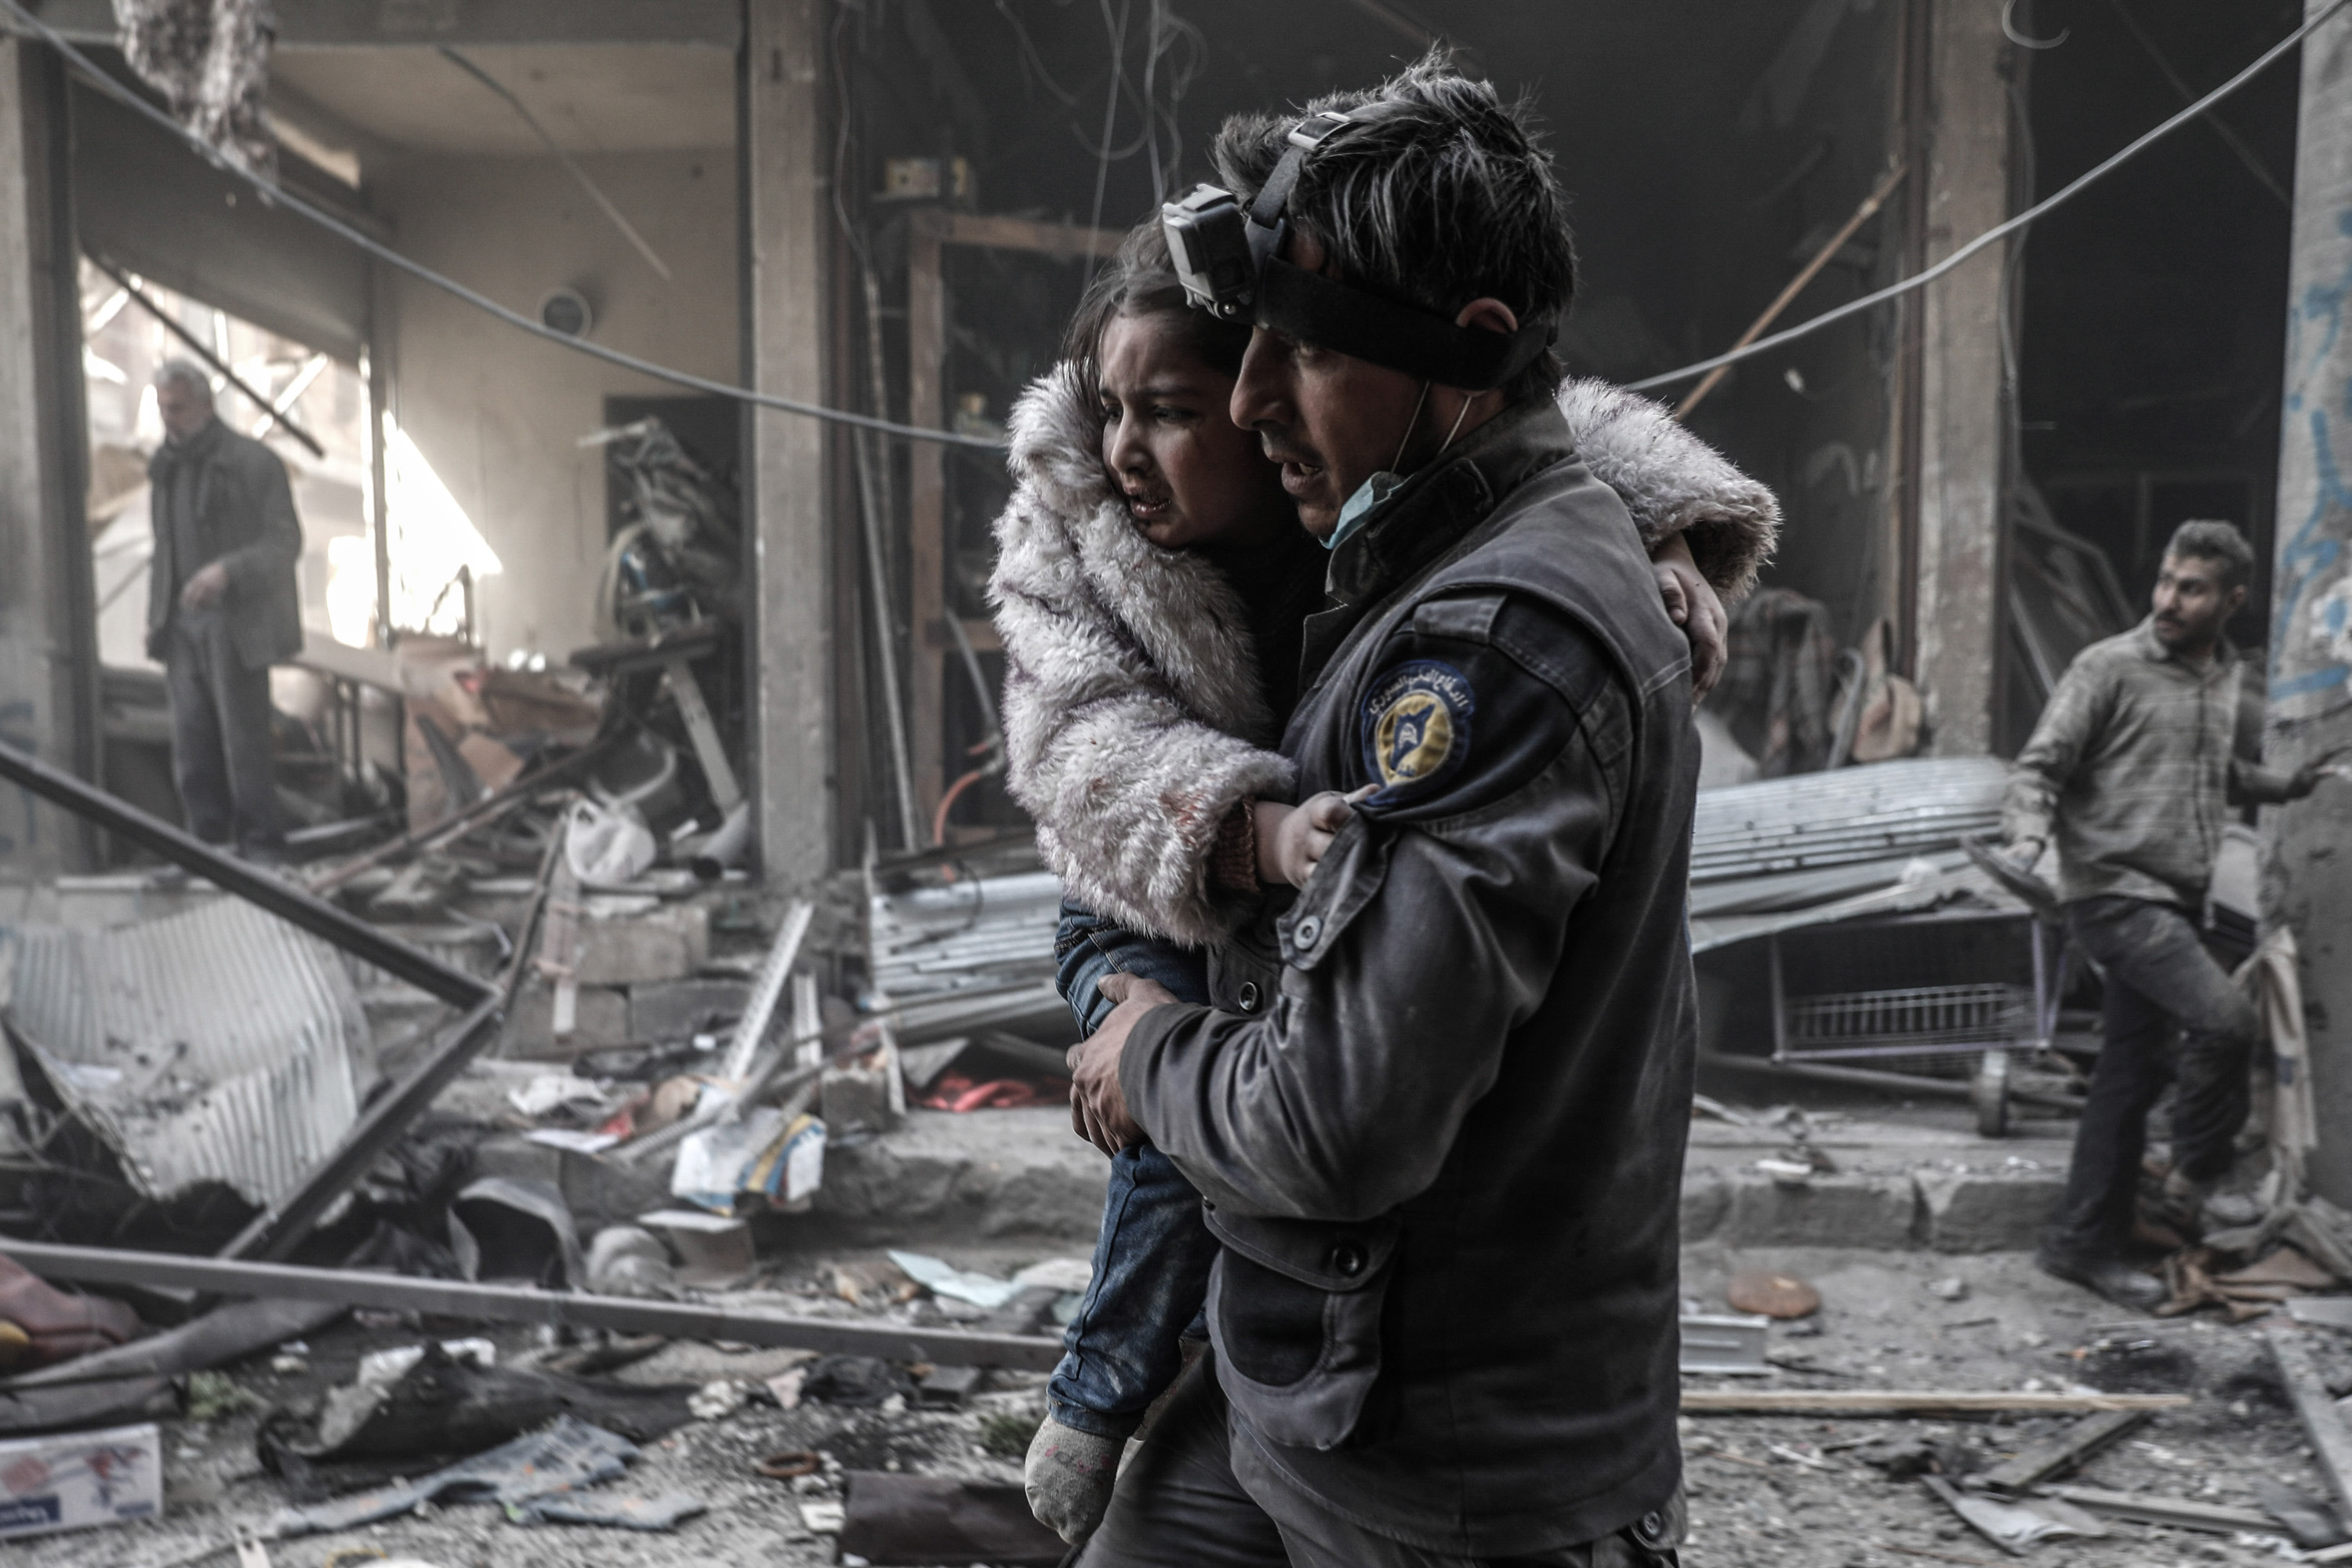 A member of the Syrian Civil Defence volunteers, also known as the White Helmets, carries a wounded girl amid the rubble following reported government airstrike on the rebel-held town of Douma, on the eastern outskirts of the capital Damascus, on February 25, 2017.
Syrian regime forces carried out raids on several areas in the country, targeting mainly the besieged town of Douma, causing the deaths of at least 13 civilians, according to Syrian Observatory for Human Rights. The raids continued despite the United Nations confirmation a few days earlier that Moscow formally asked its ally Damascus to stop launching strikes during the Geneva negotiations, which began earlier in the week. / AFP PHOTO / Sameer Al-Doumy